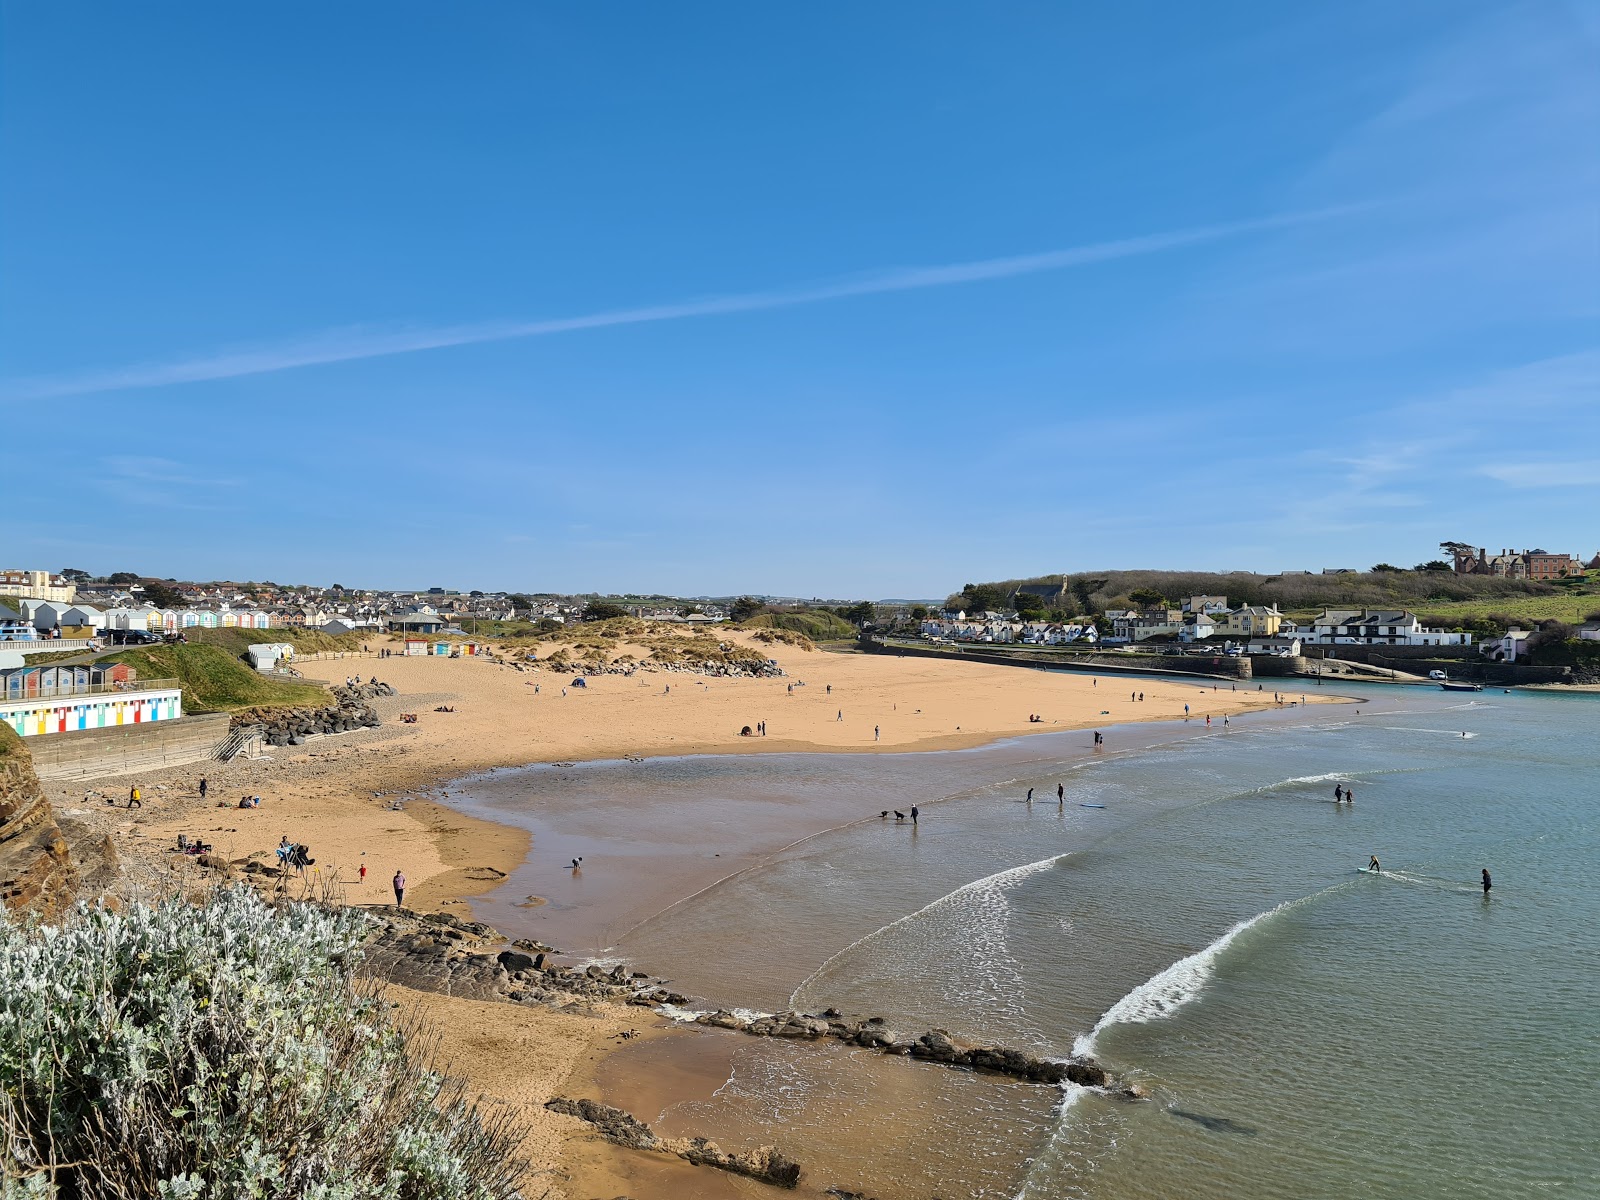 Photo of Summerleaze beach with bright sand surface